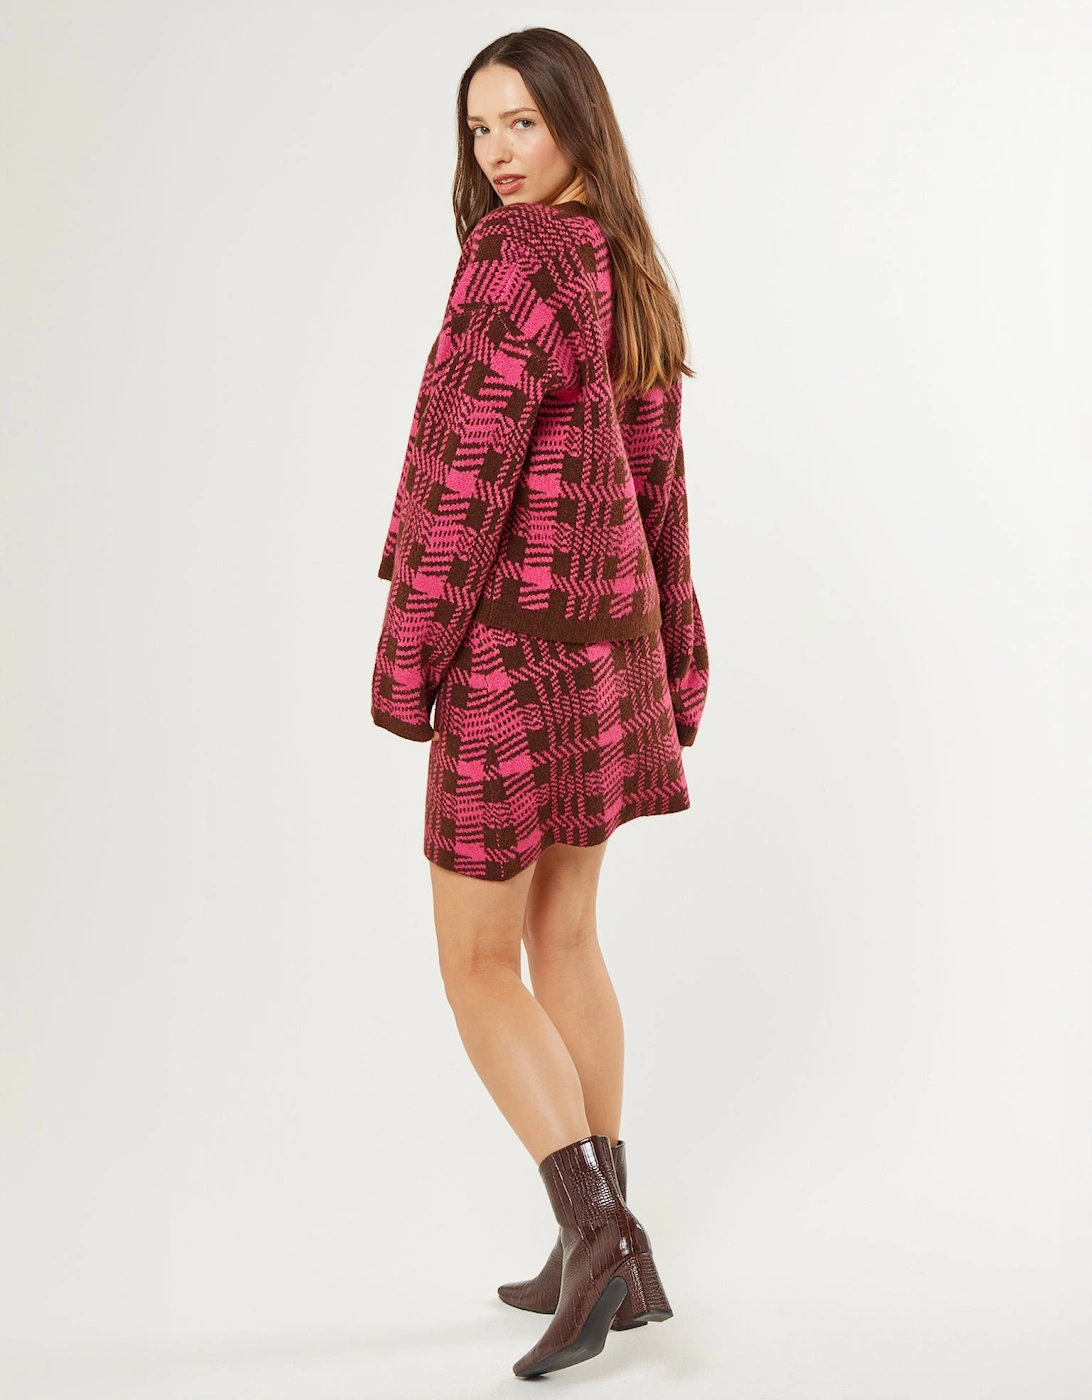 Emma Checked Knitted Skirt in Magenta and Brown